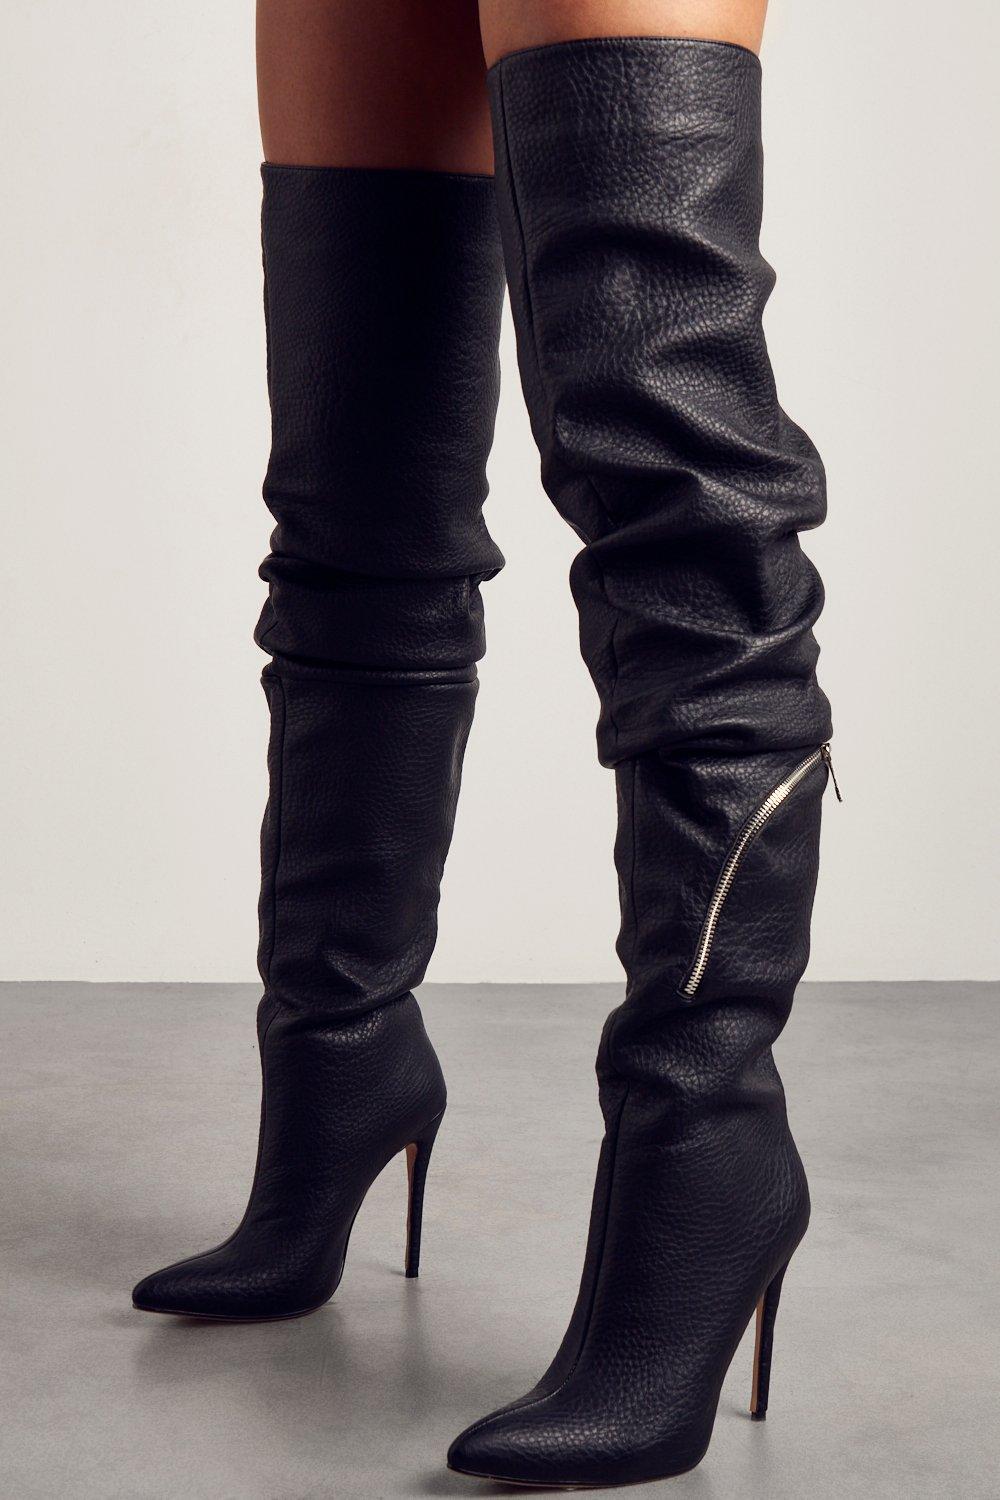 Over The Knee Boots & Thigh High Boots | Misspap